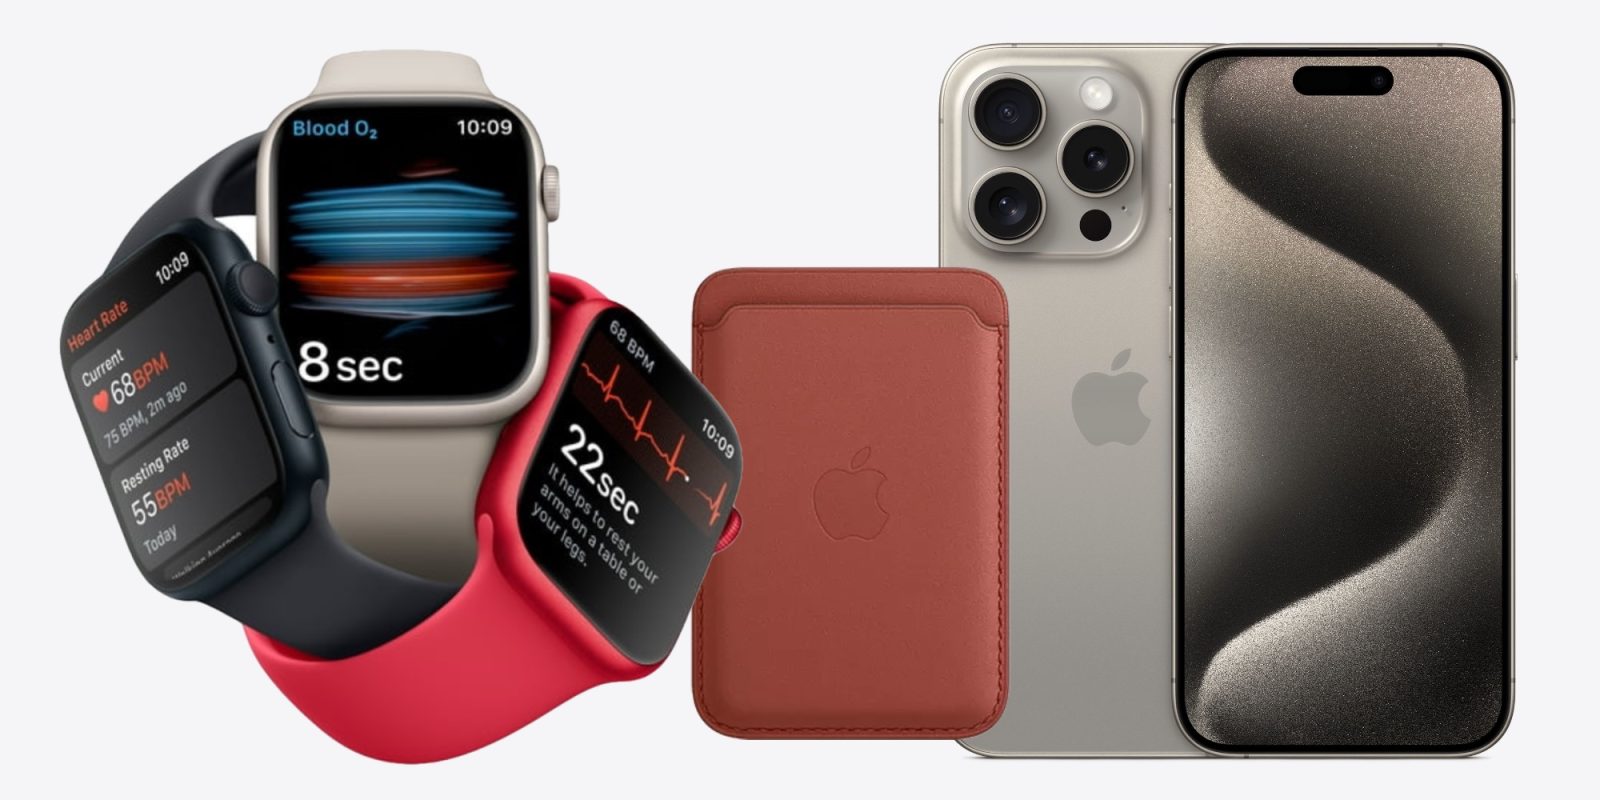 Apple Watch clearance sale goes live for today only at Woot